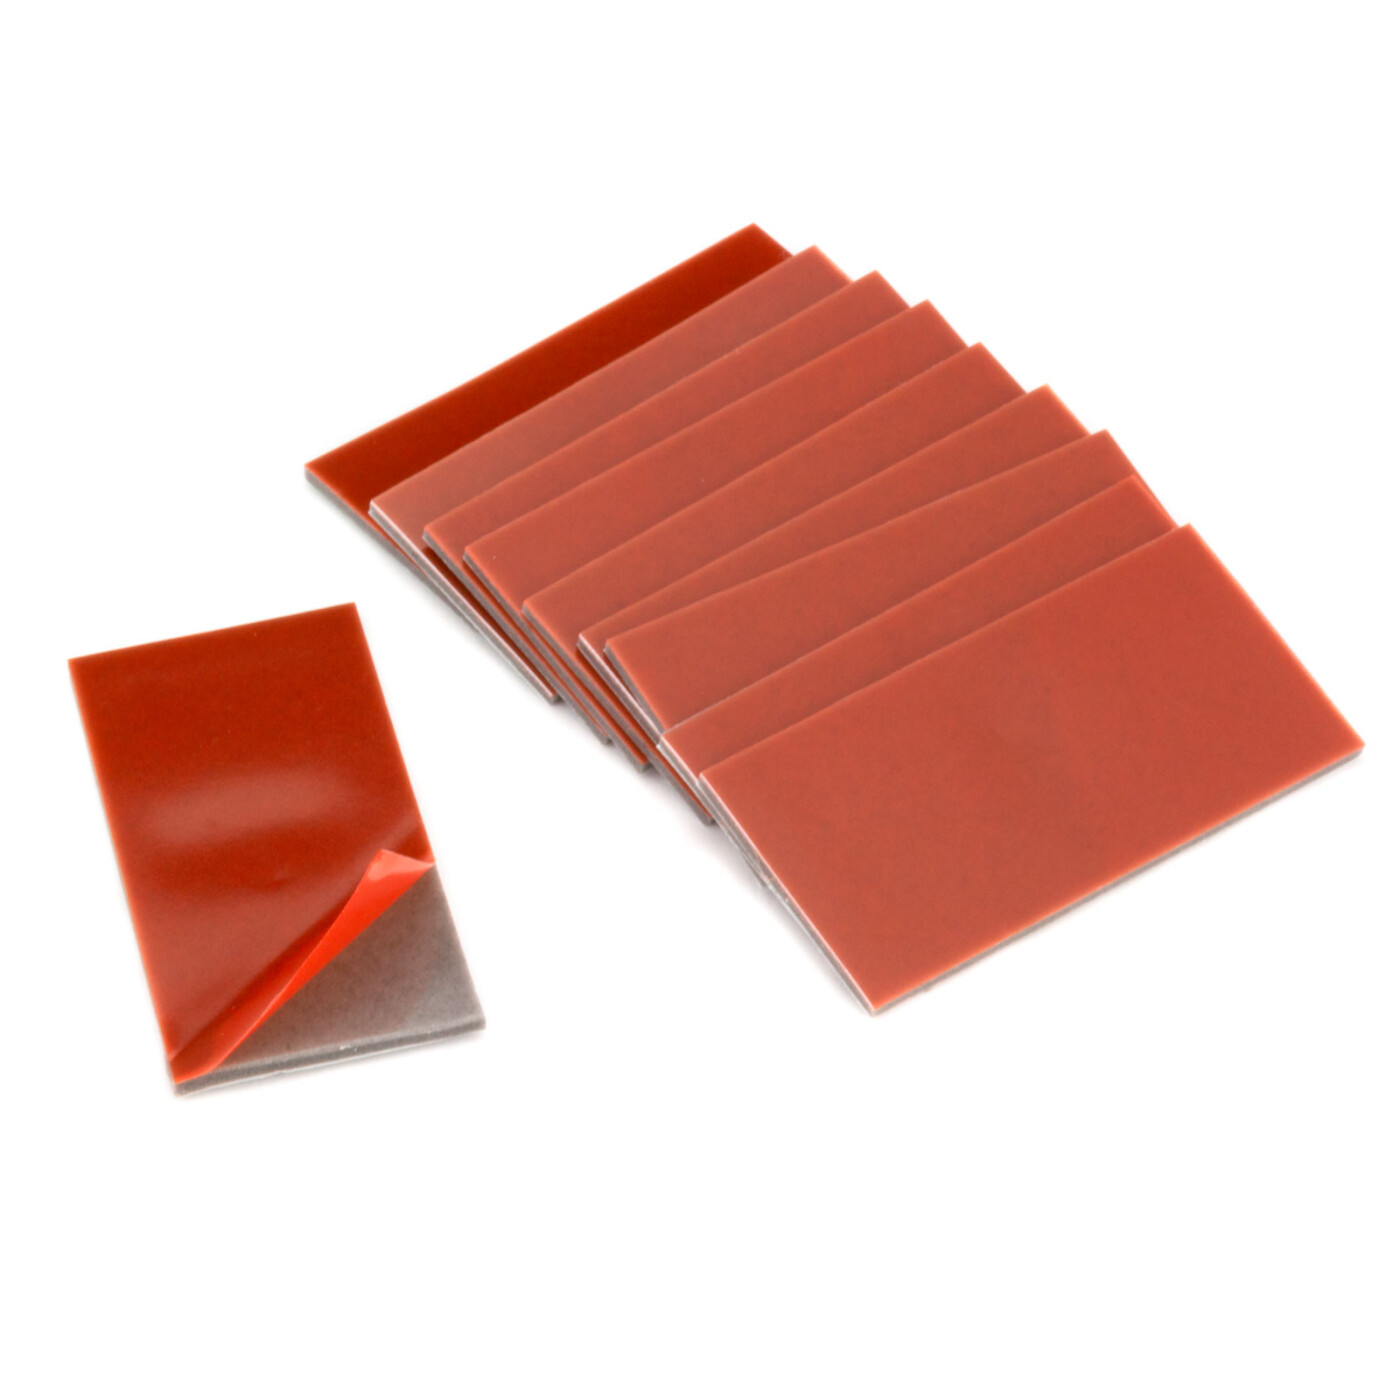 Buy 3M GT7116 adhesive pads 50x25mm 10 pieces